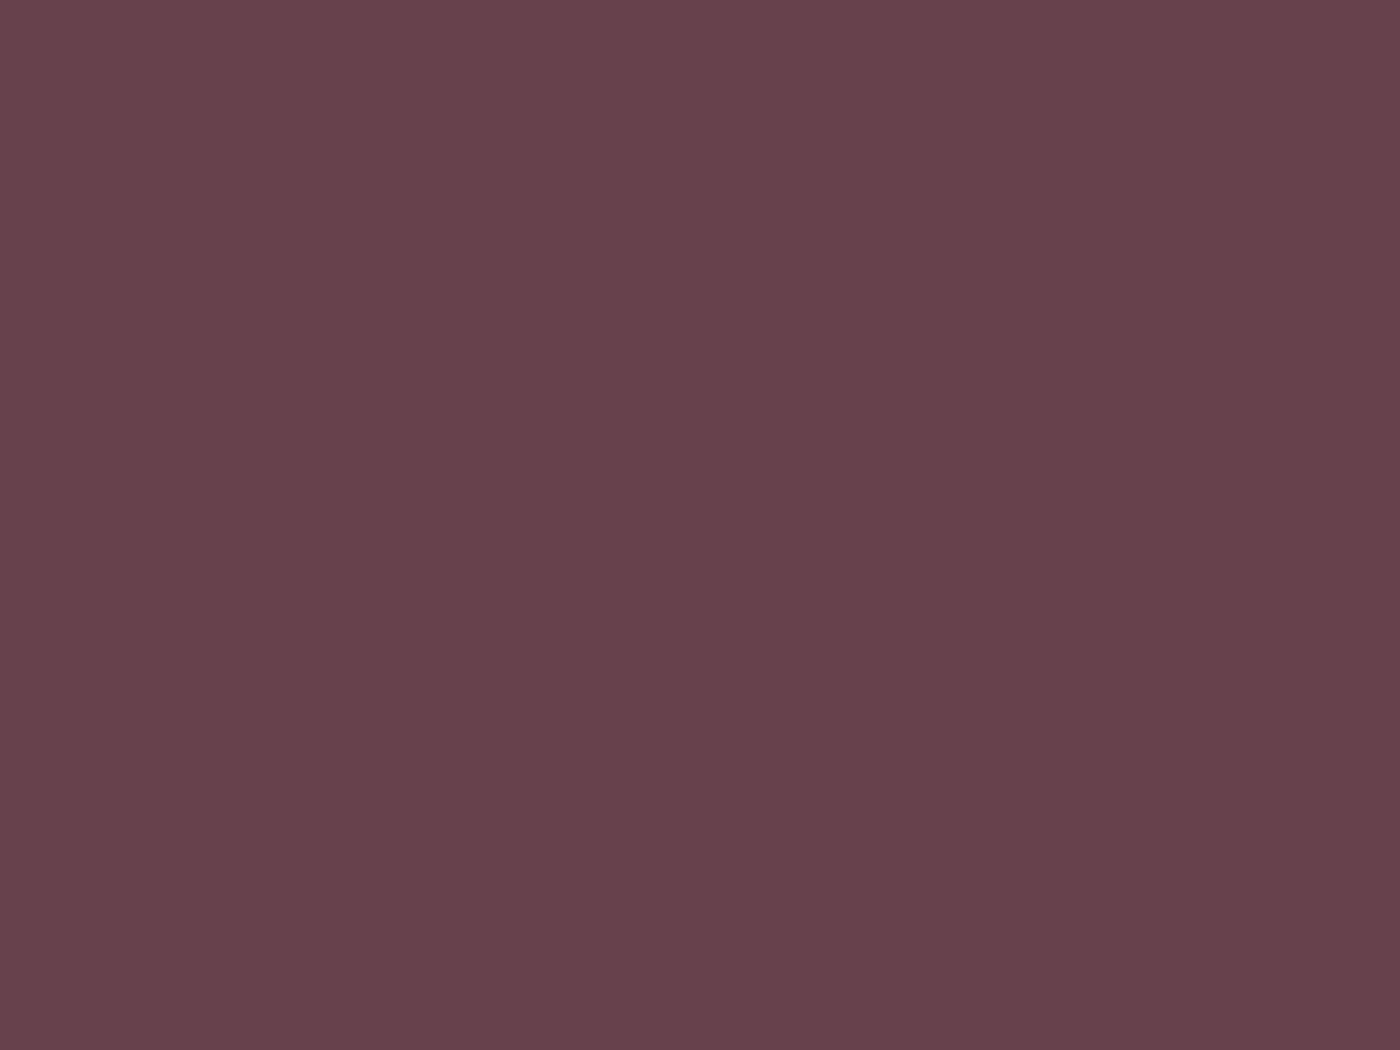 1400x1050 Deep Tuscan Red Solid Color Background